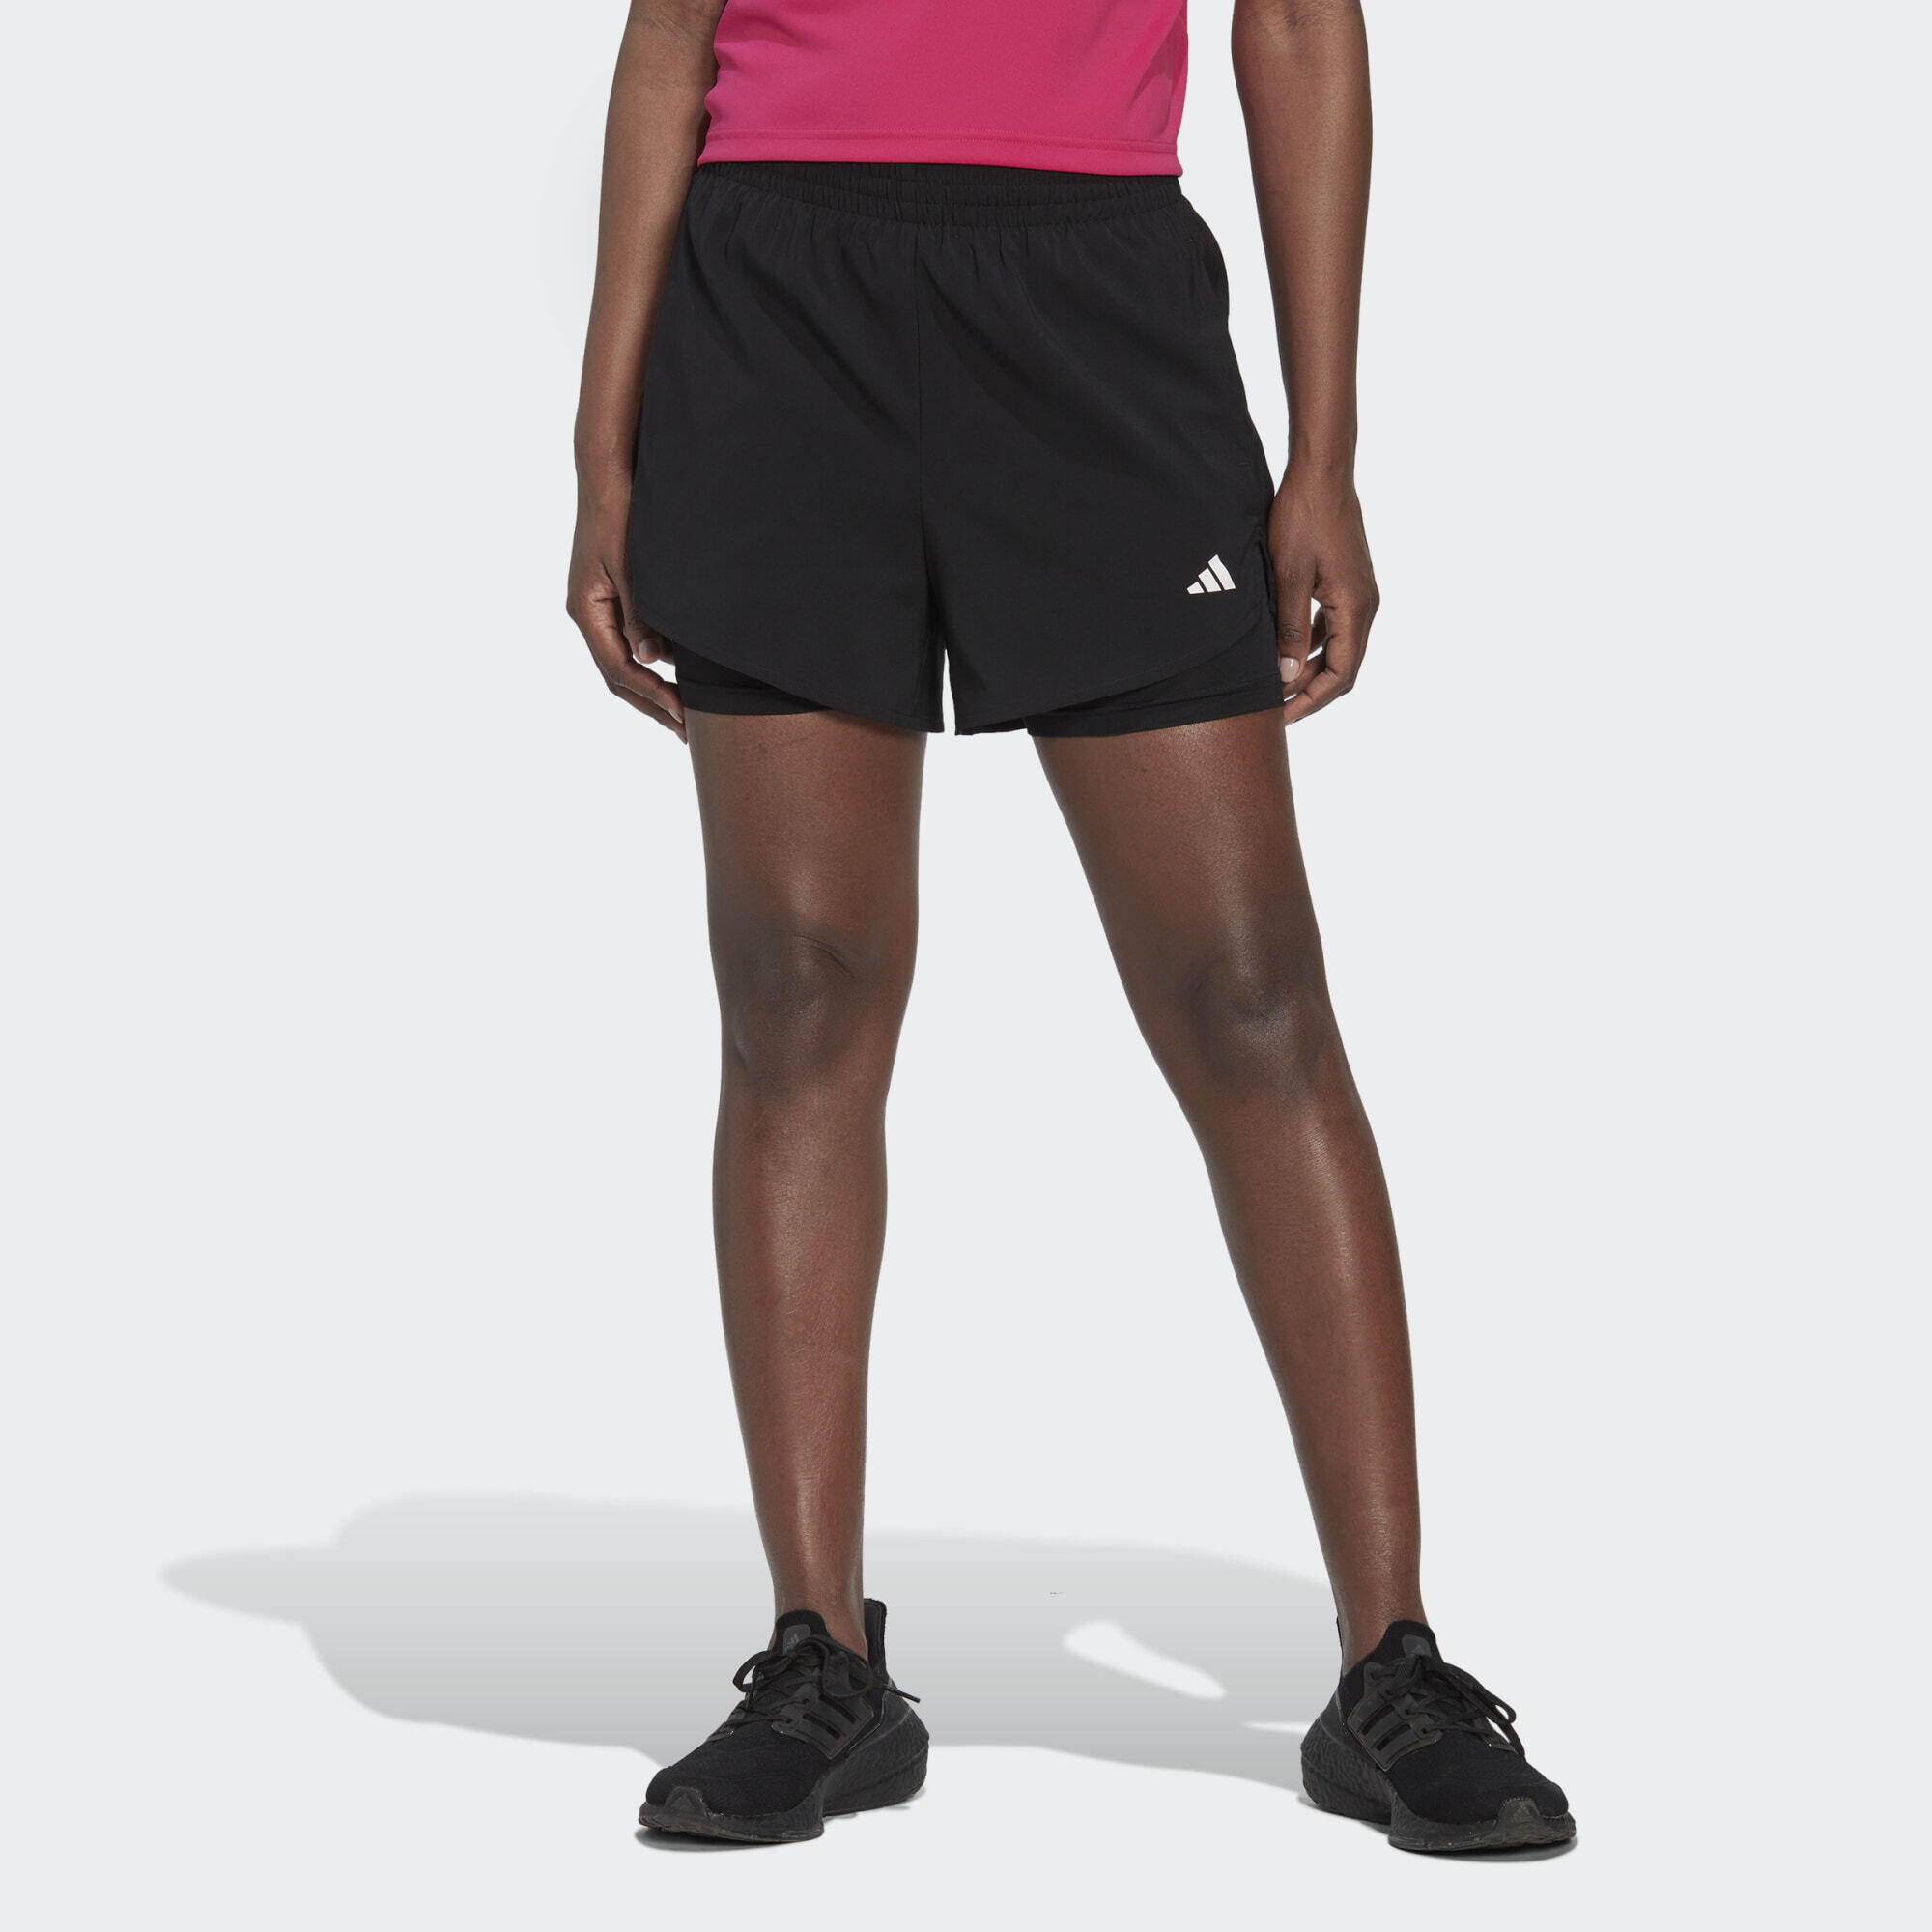 ADIDAS AEROREADY Made for Training Minimal Two-in-One Shorts